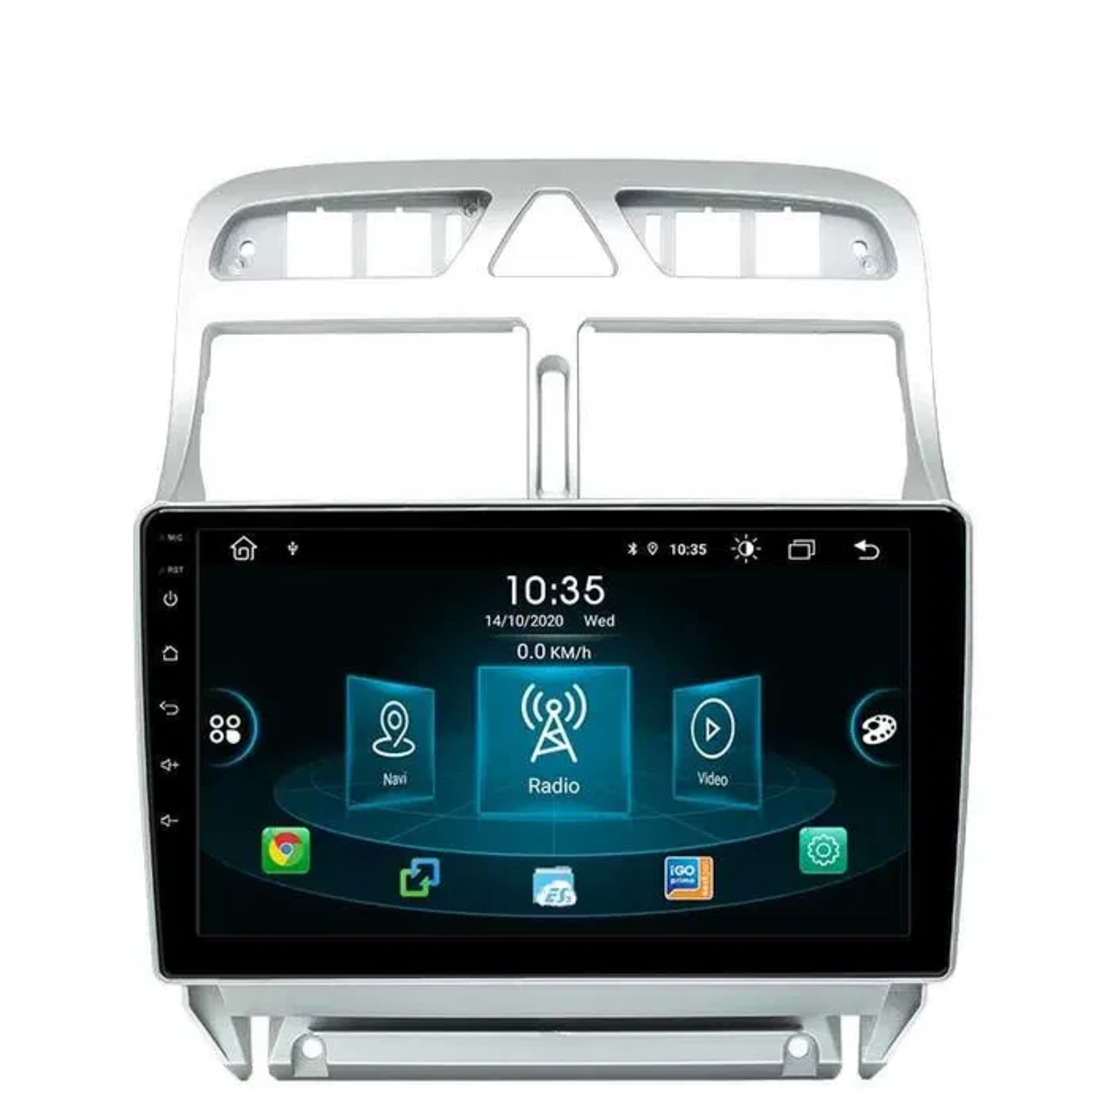 Peugeot 307/307CC 2002- 2013 Android Multimedia/Navigation